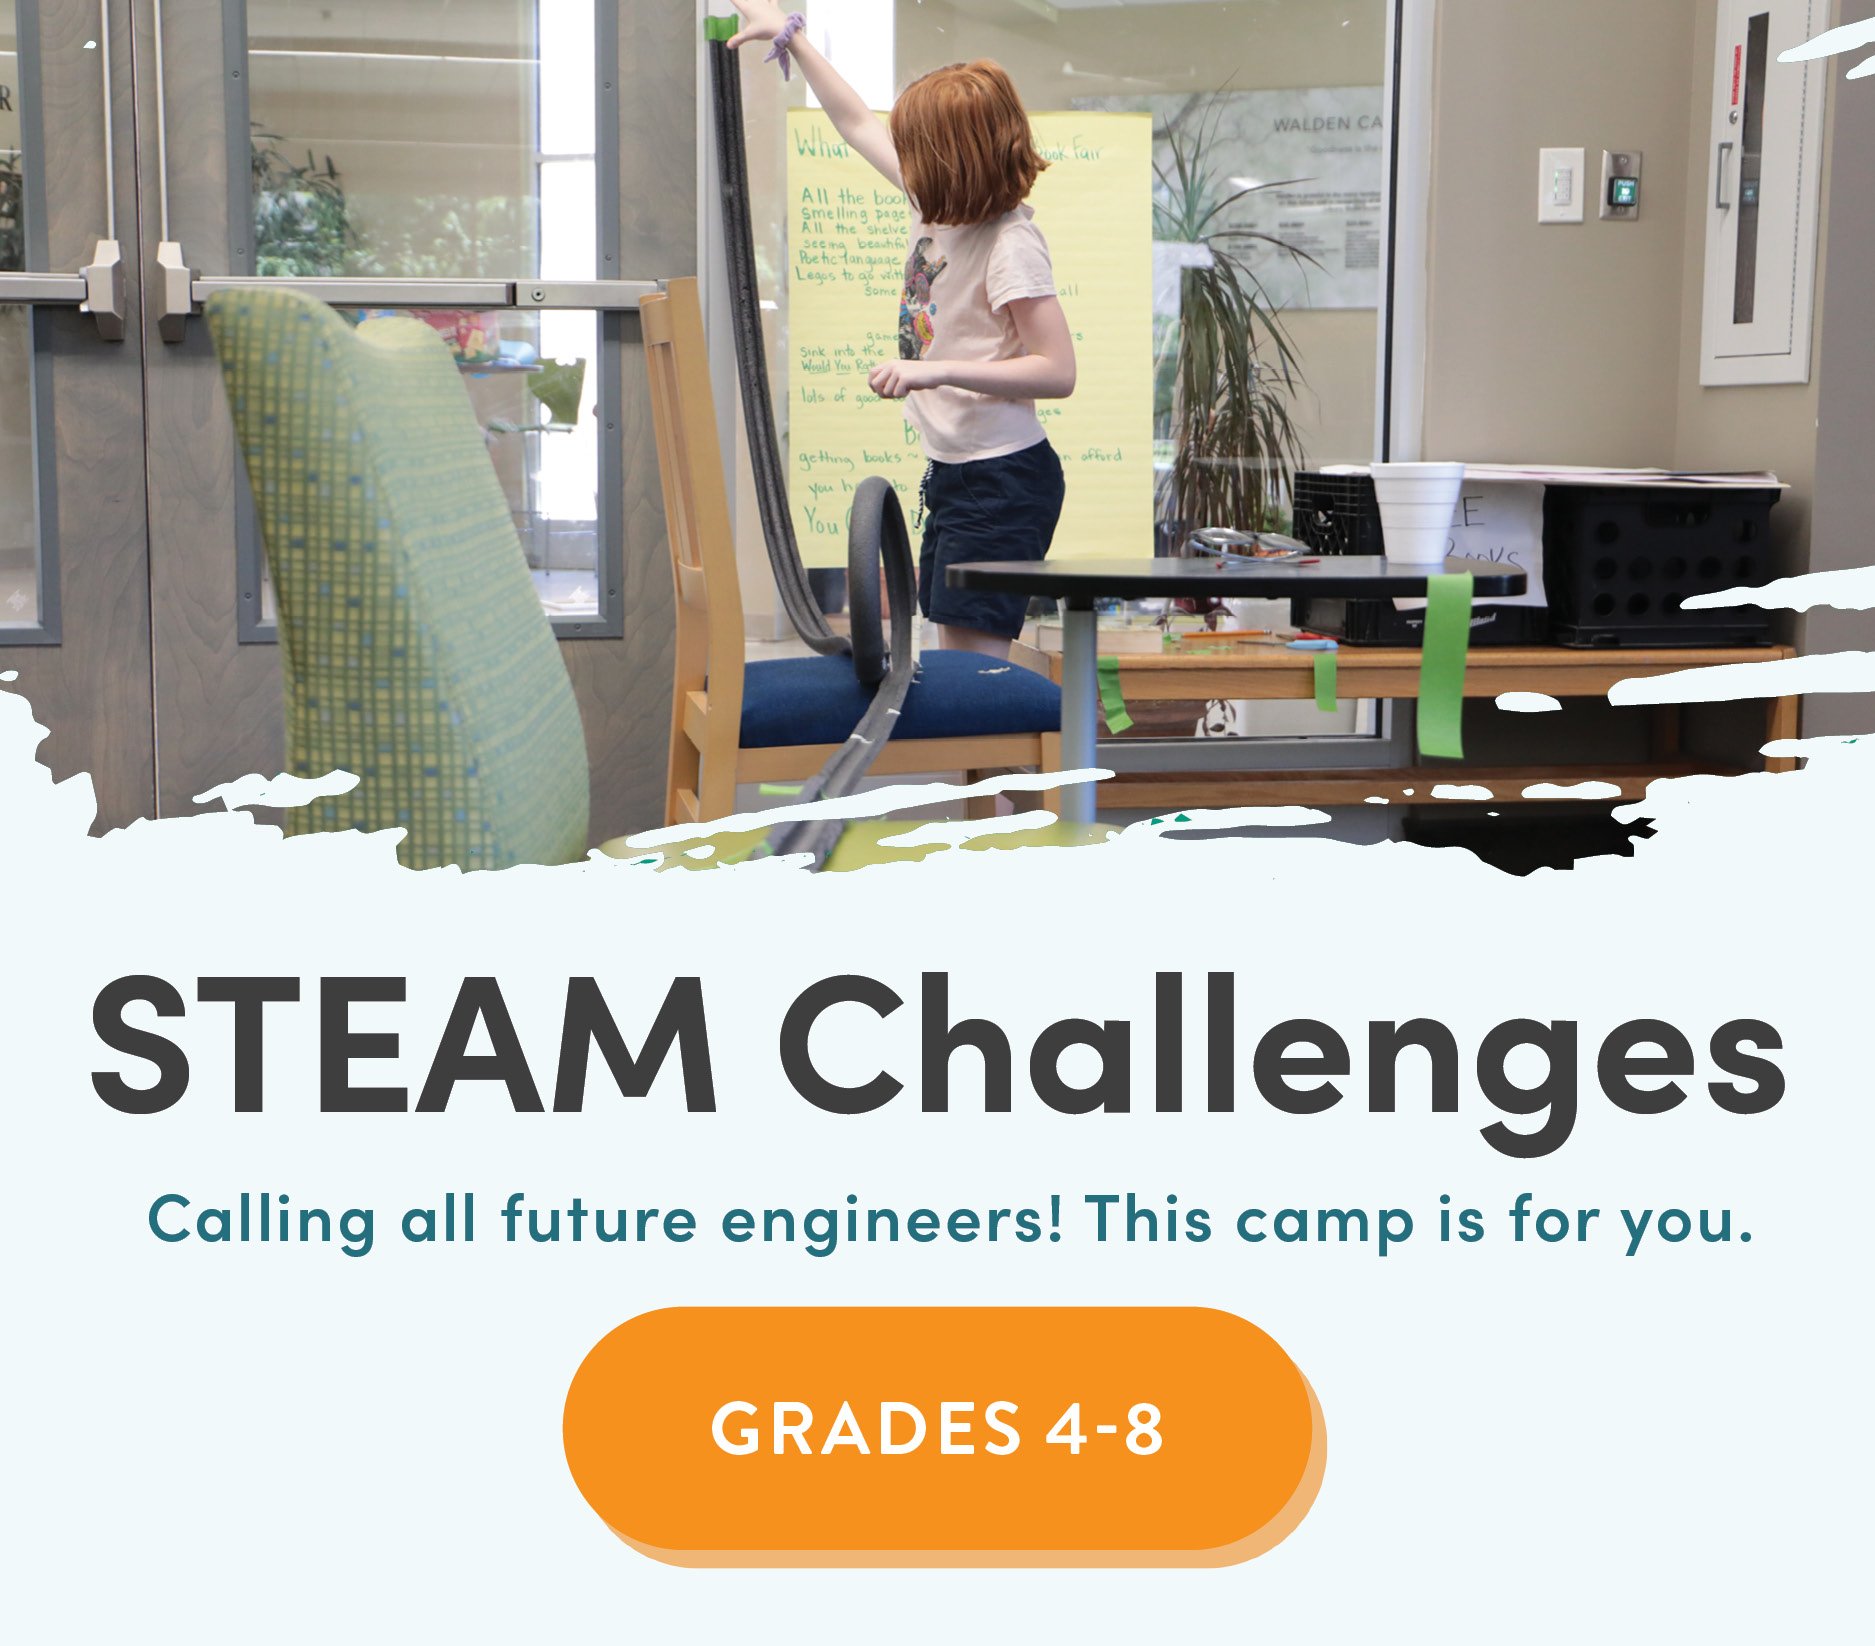 Embark on an exhilarating journey of learning and discovery with Camp Walden STEAM camps! Our upcoming sessions promise excitement, creativity, and boundless fun for young adventurers. SIGN UP: campwaldenschool.com

#campwaldenschool #summeradventure